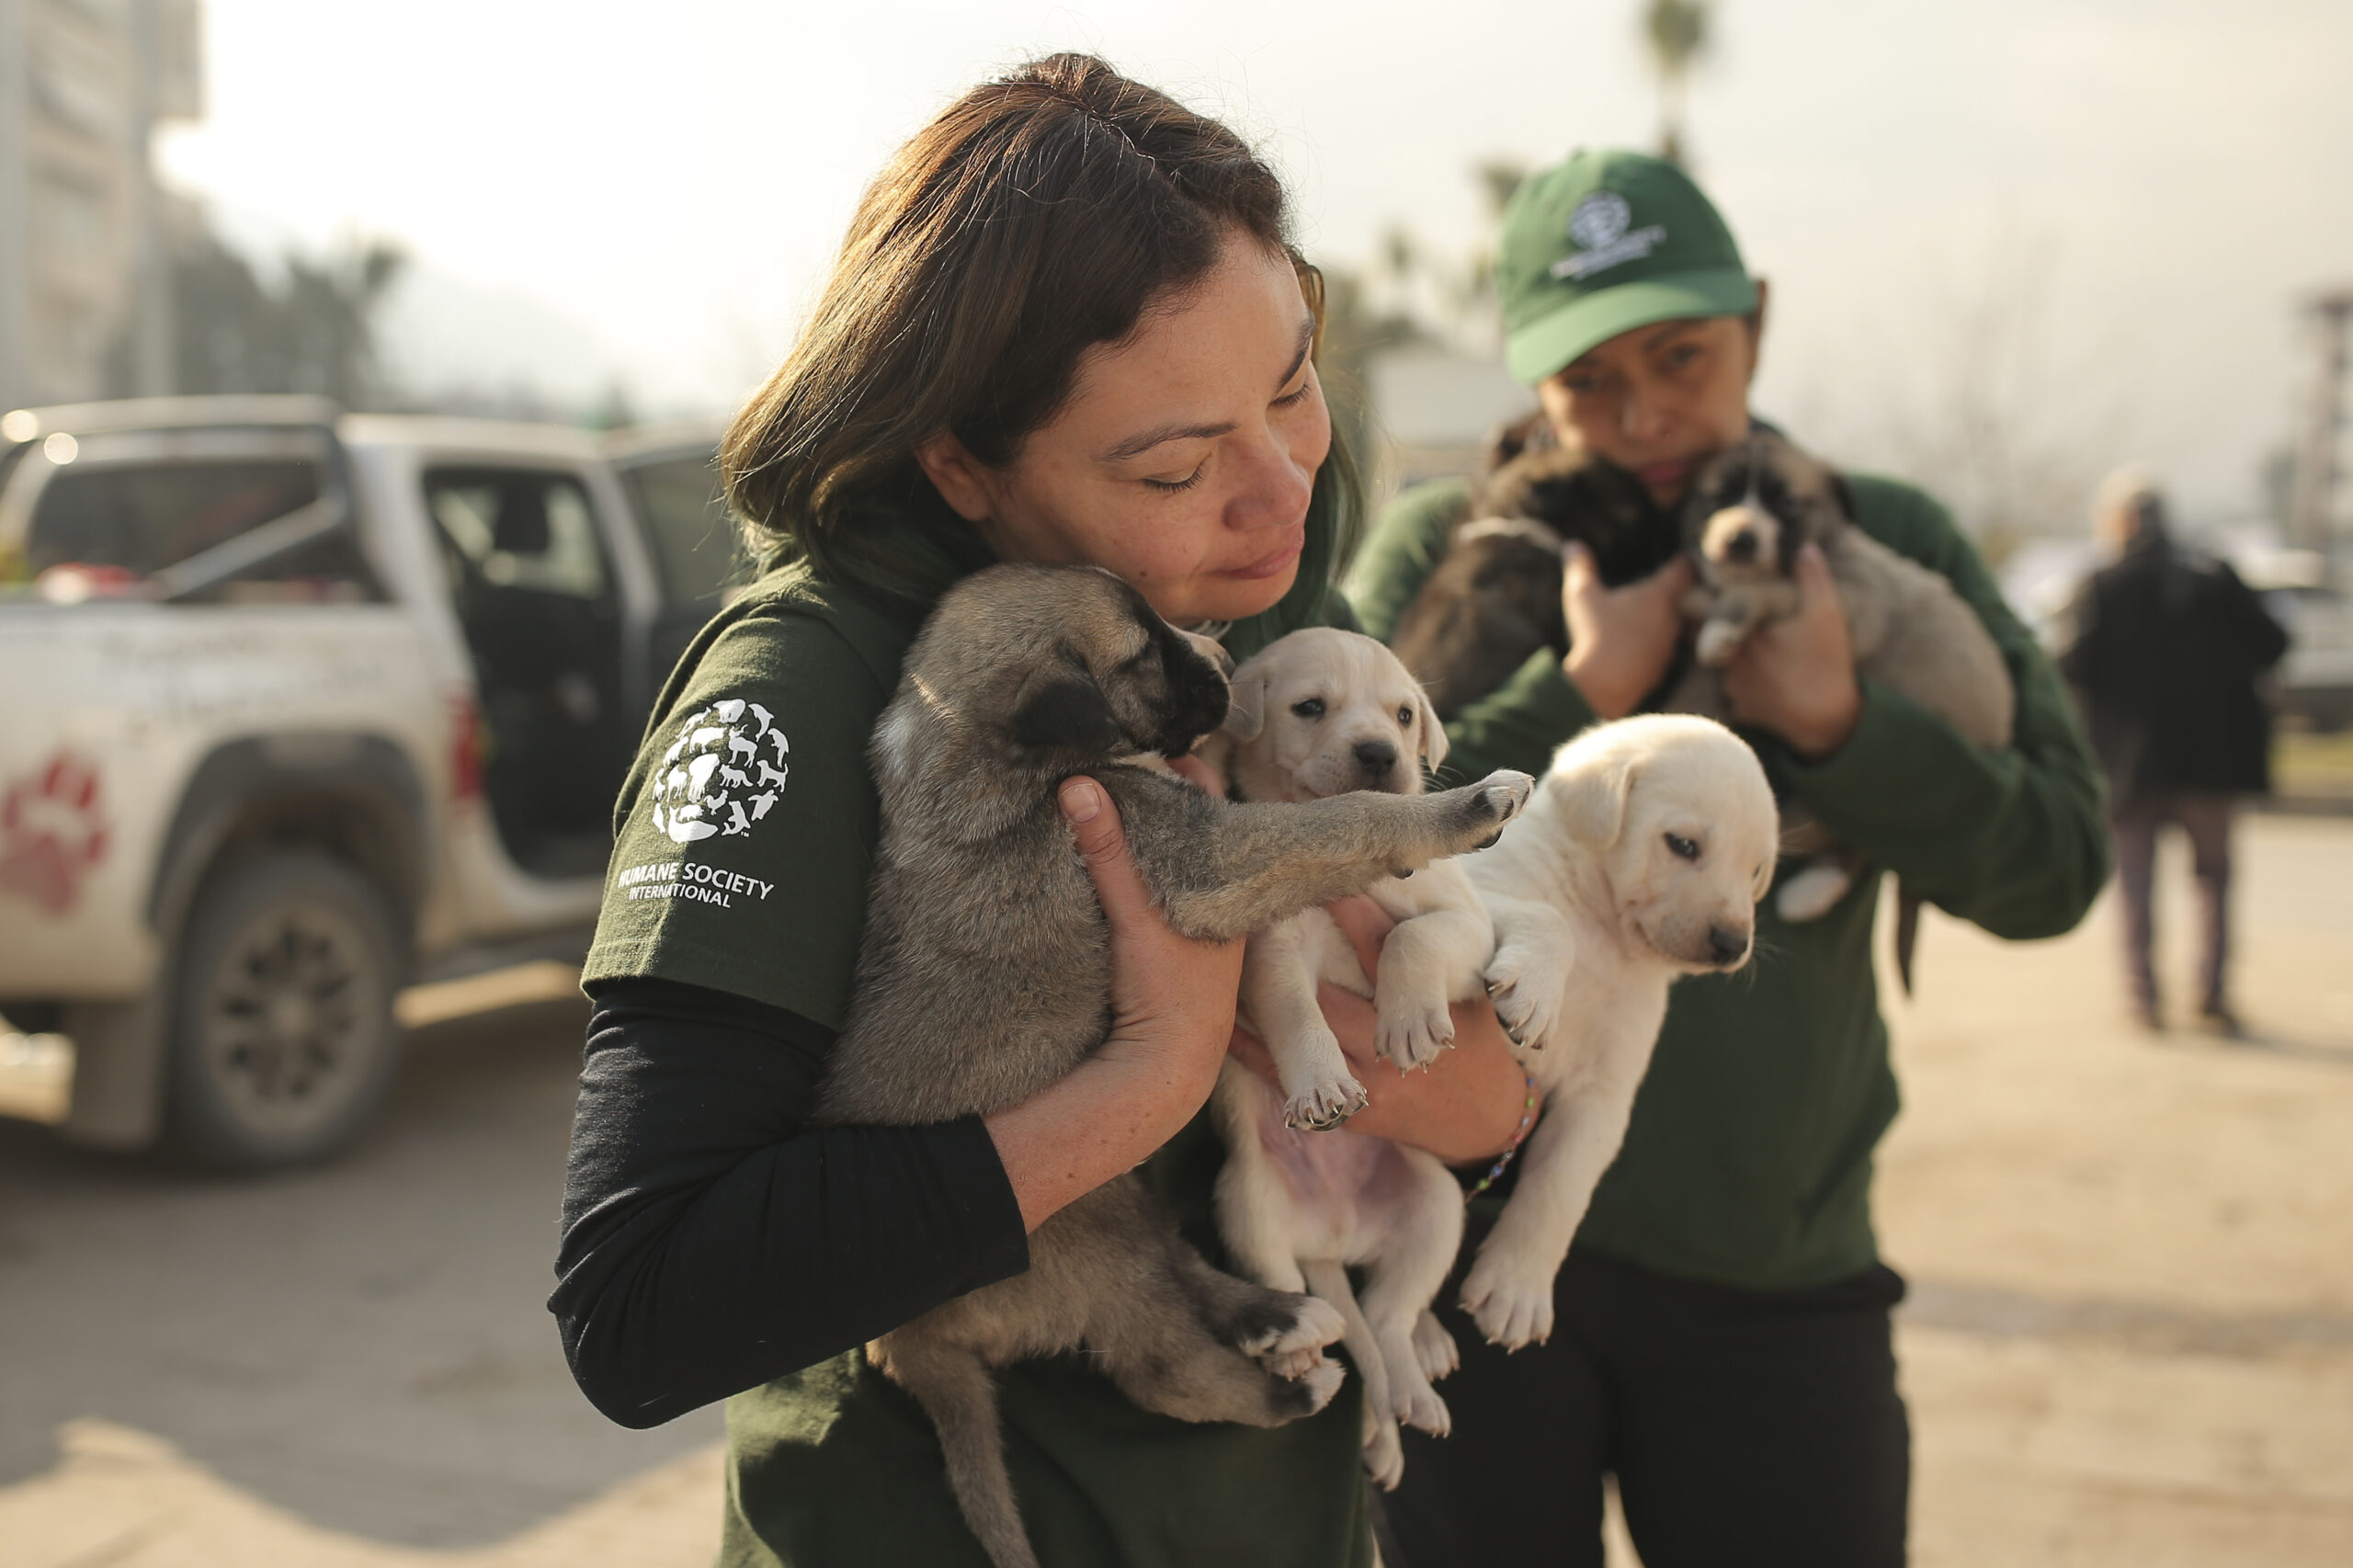 We're on the ground in Turkey to help save animals · A Humane World